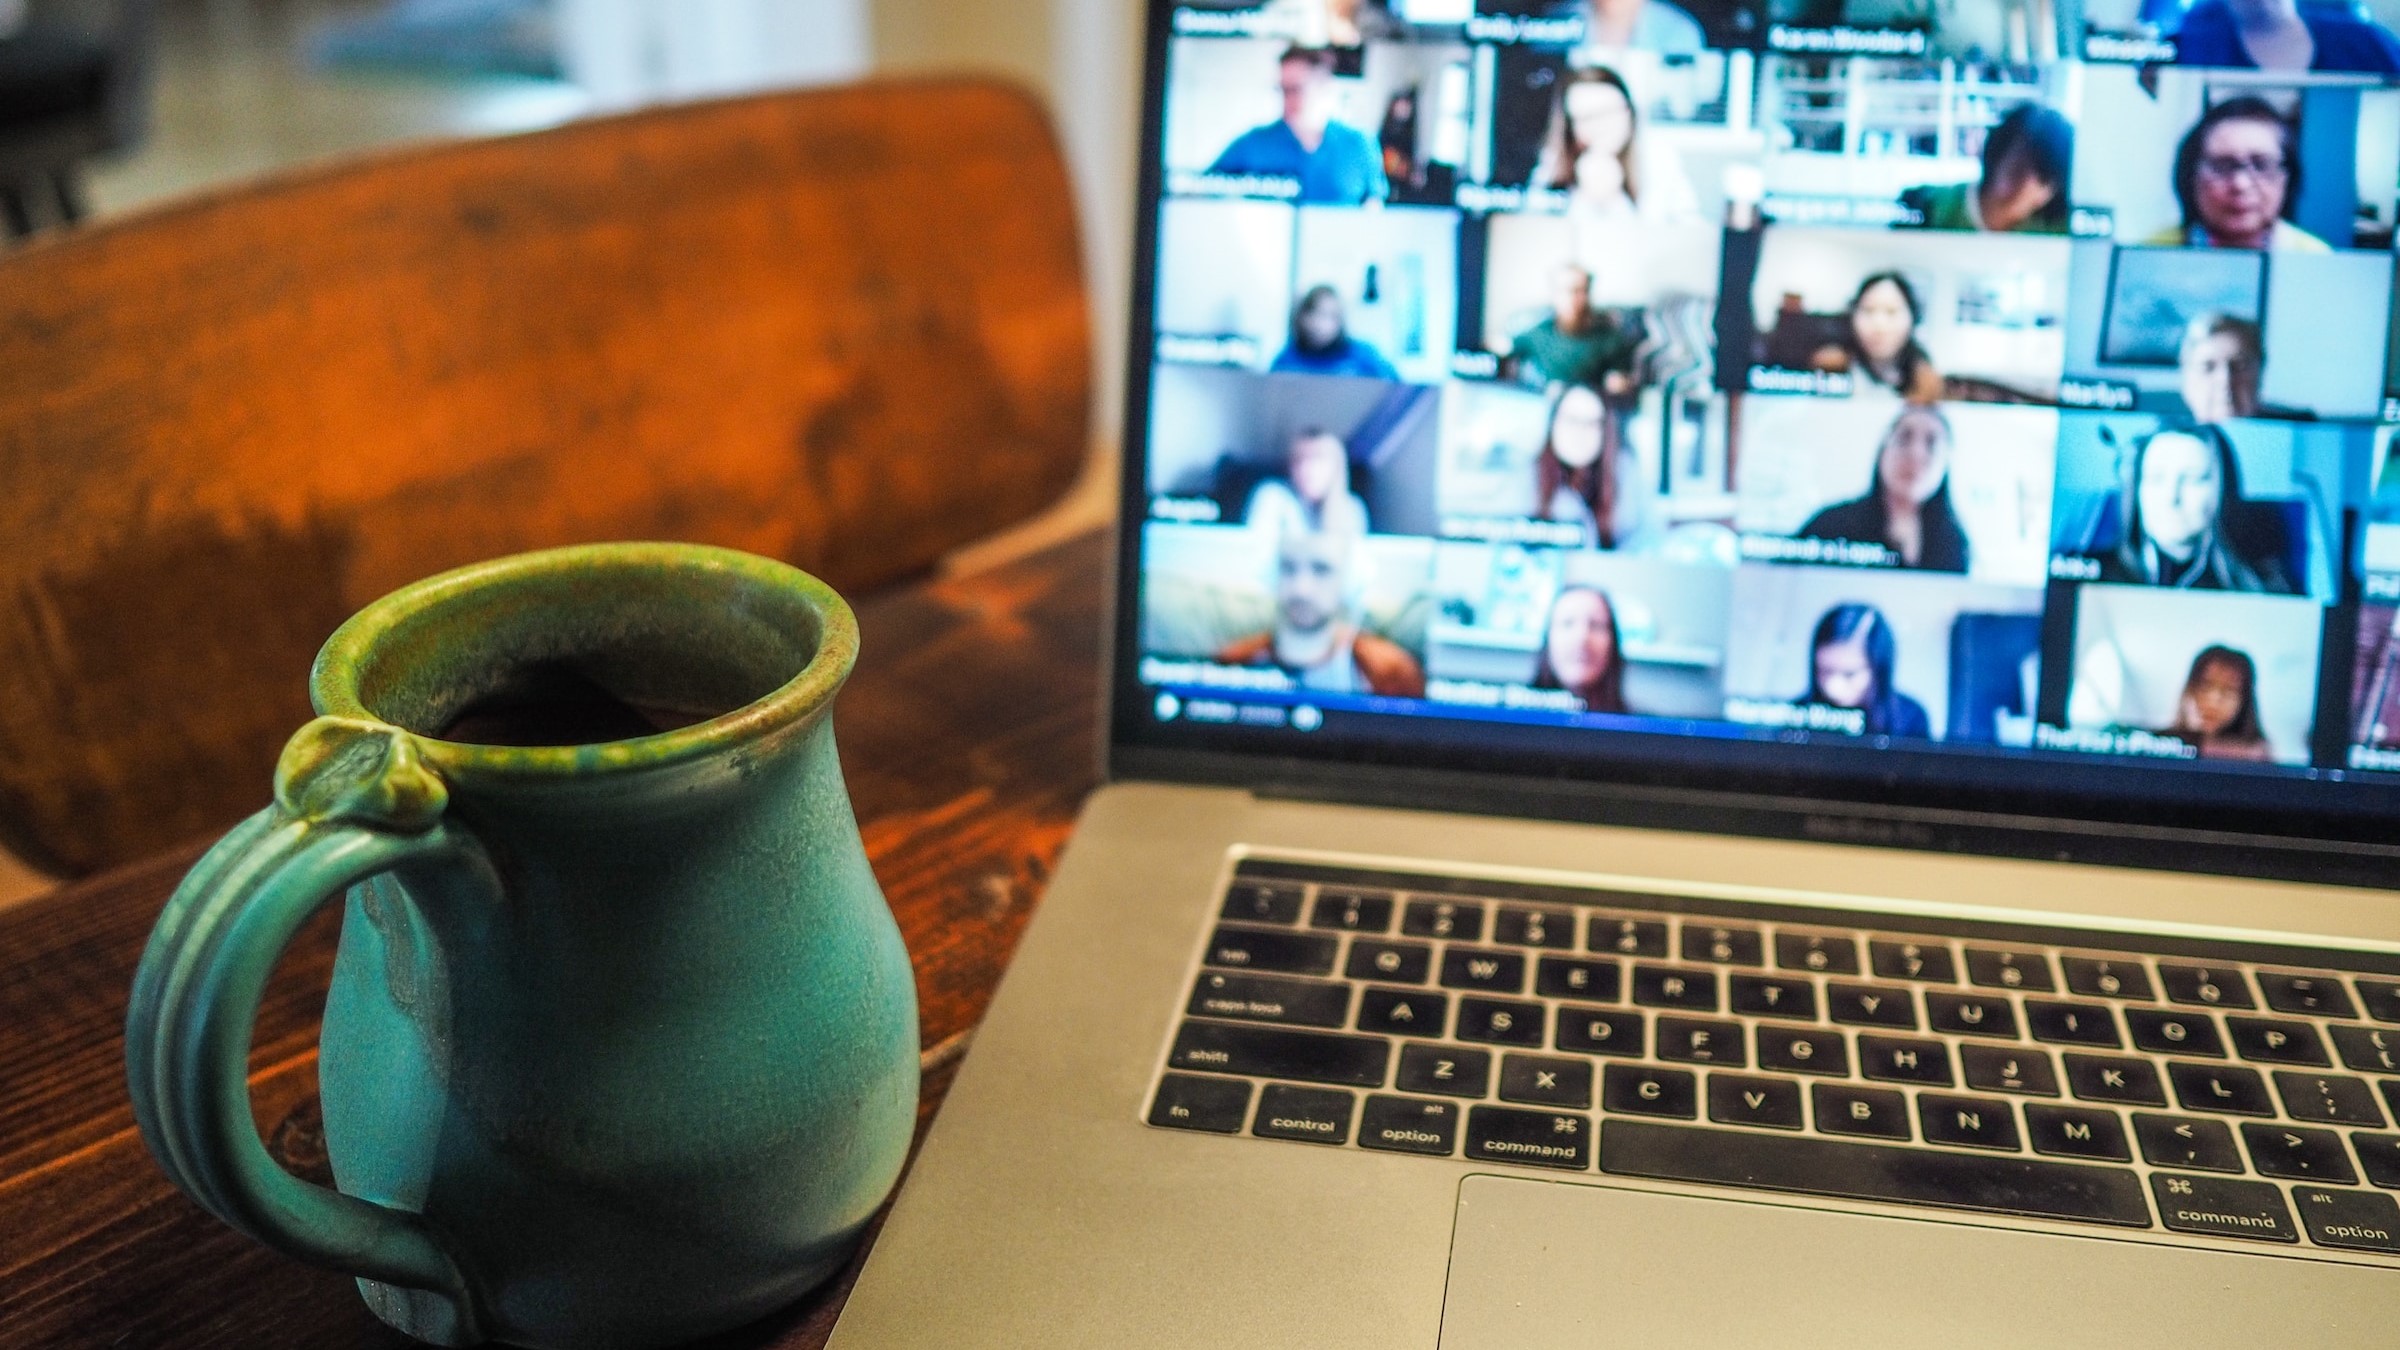 computer with coffee cup at the side, online meeting in progress on the screen